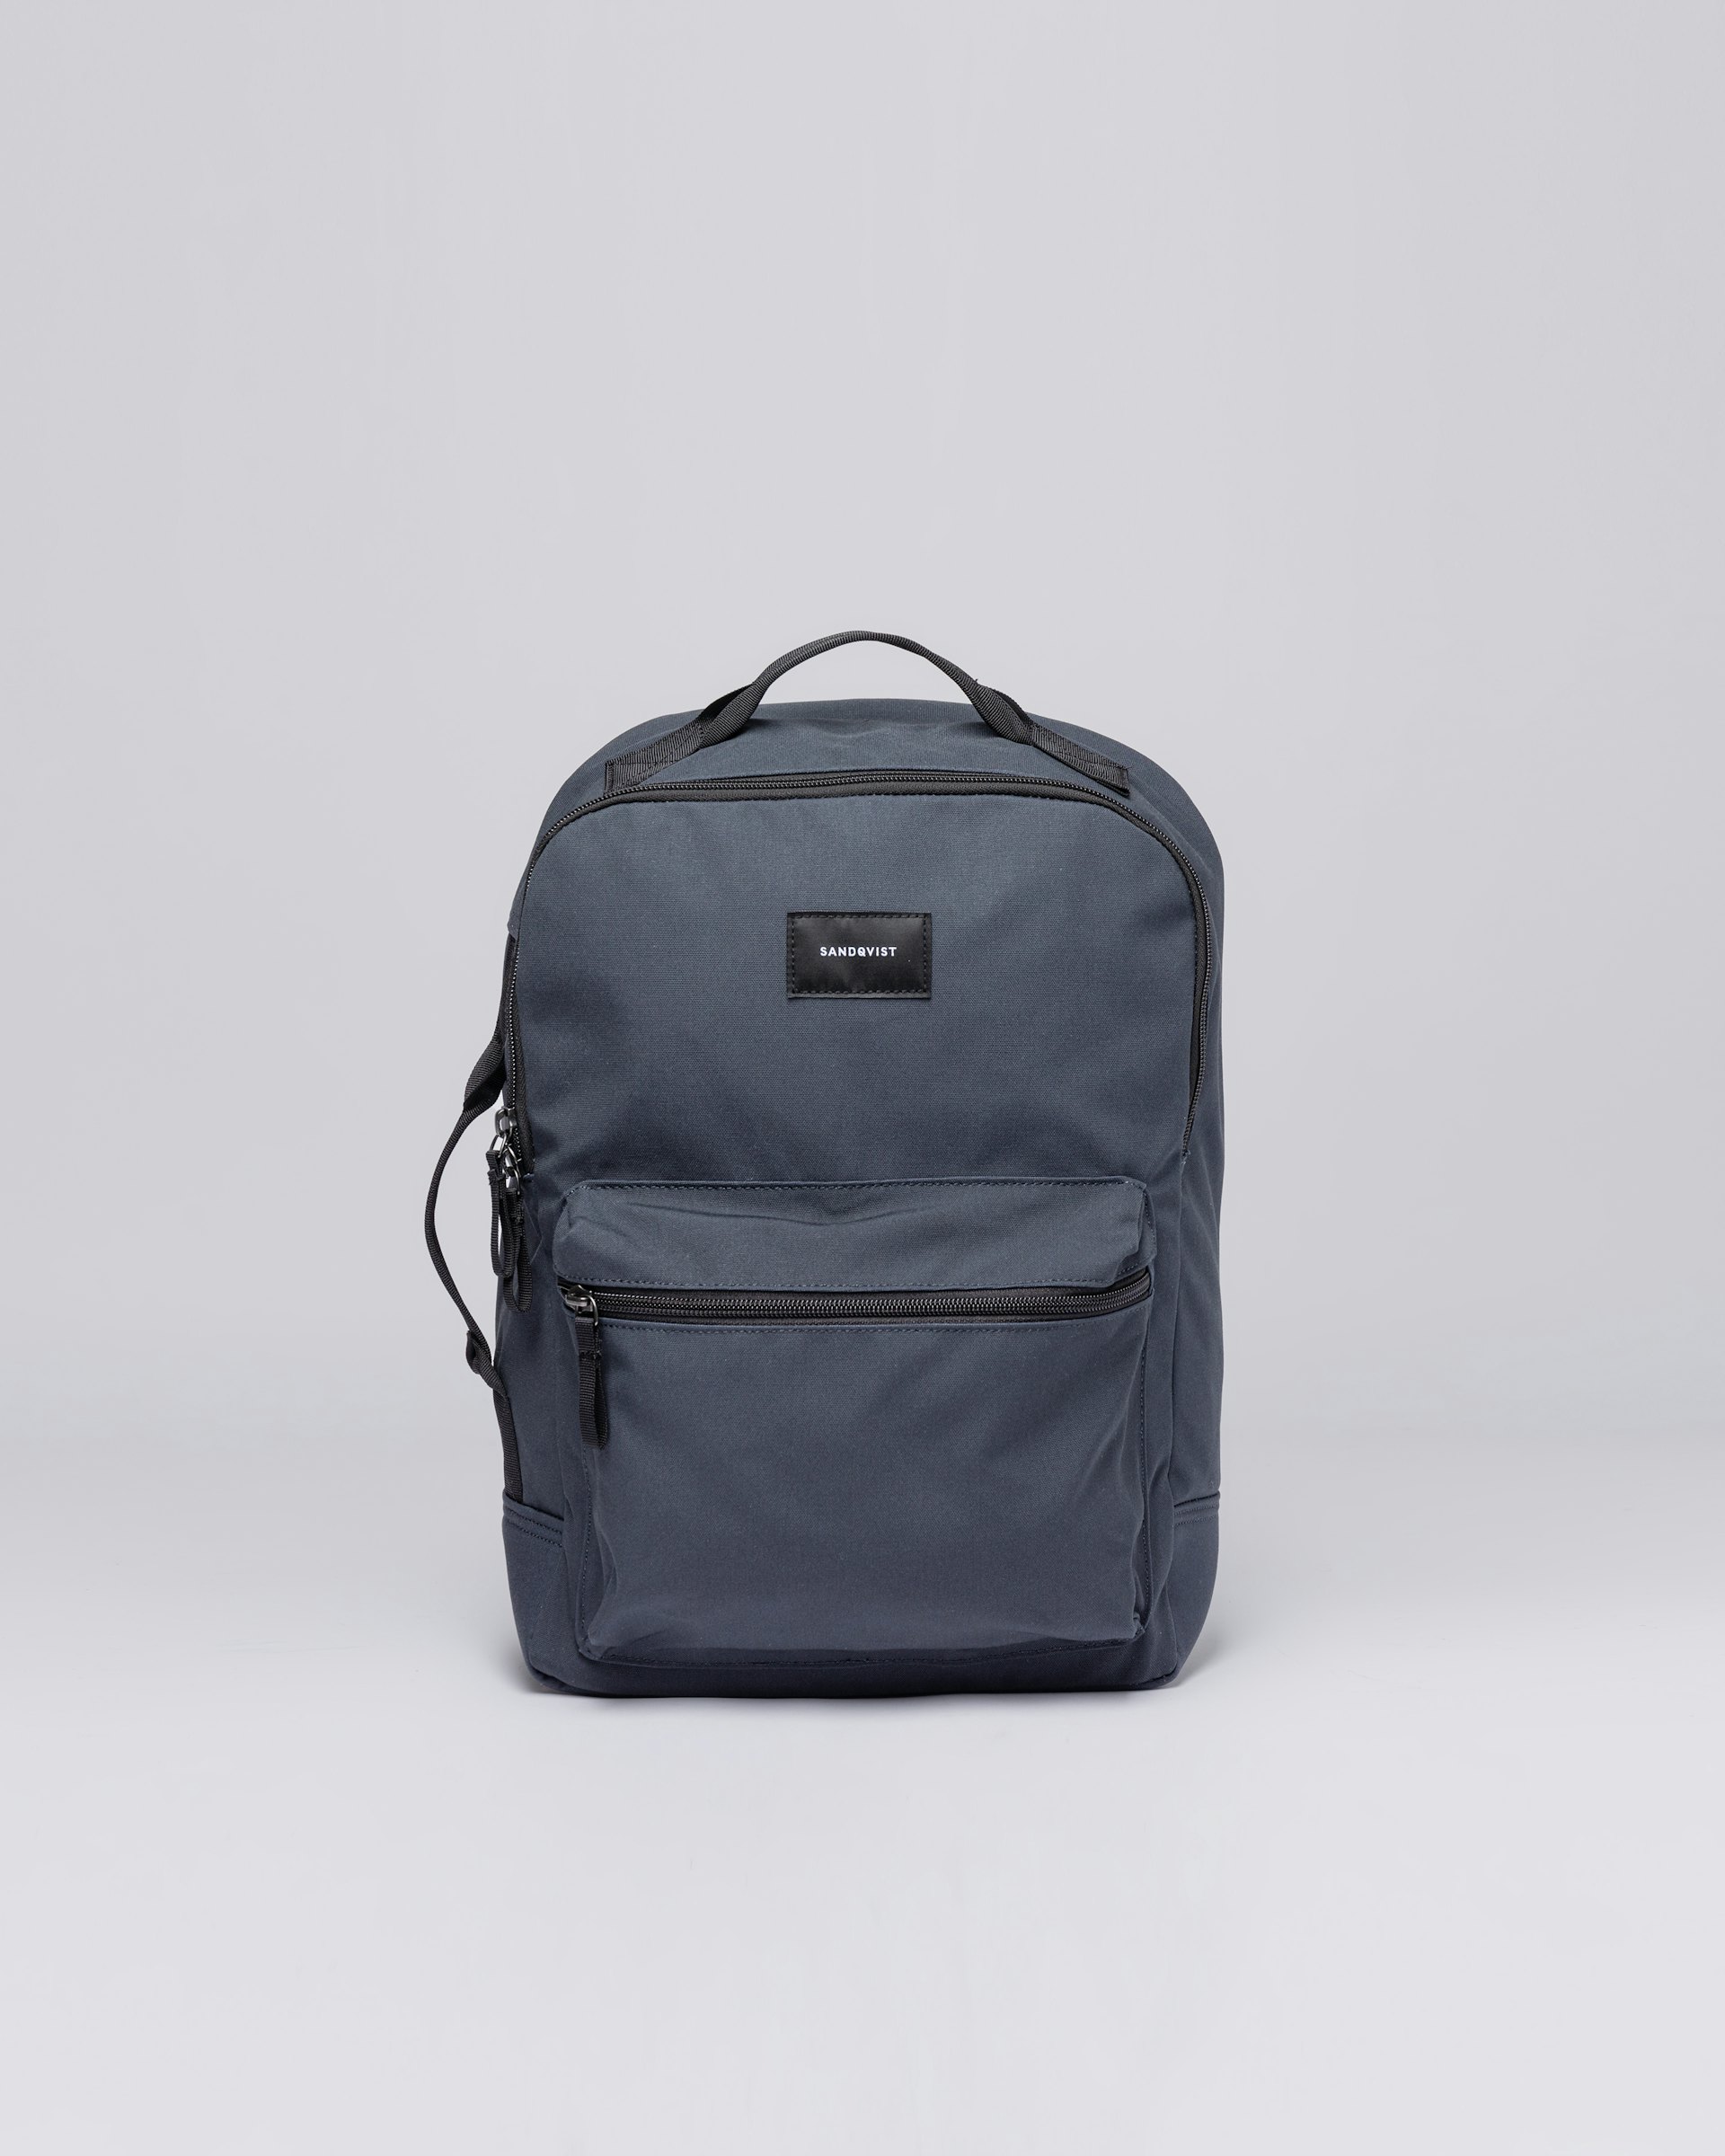 August belongs to the category Backpacks and is in color navy